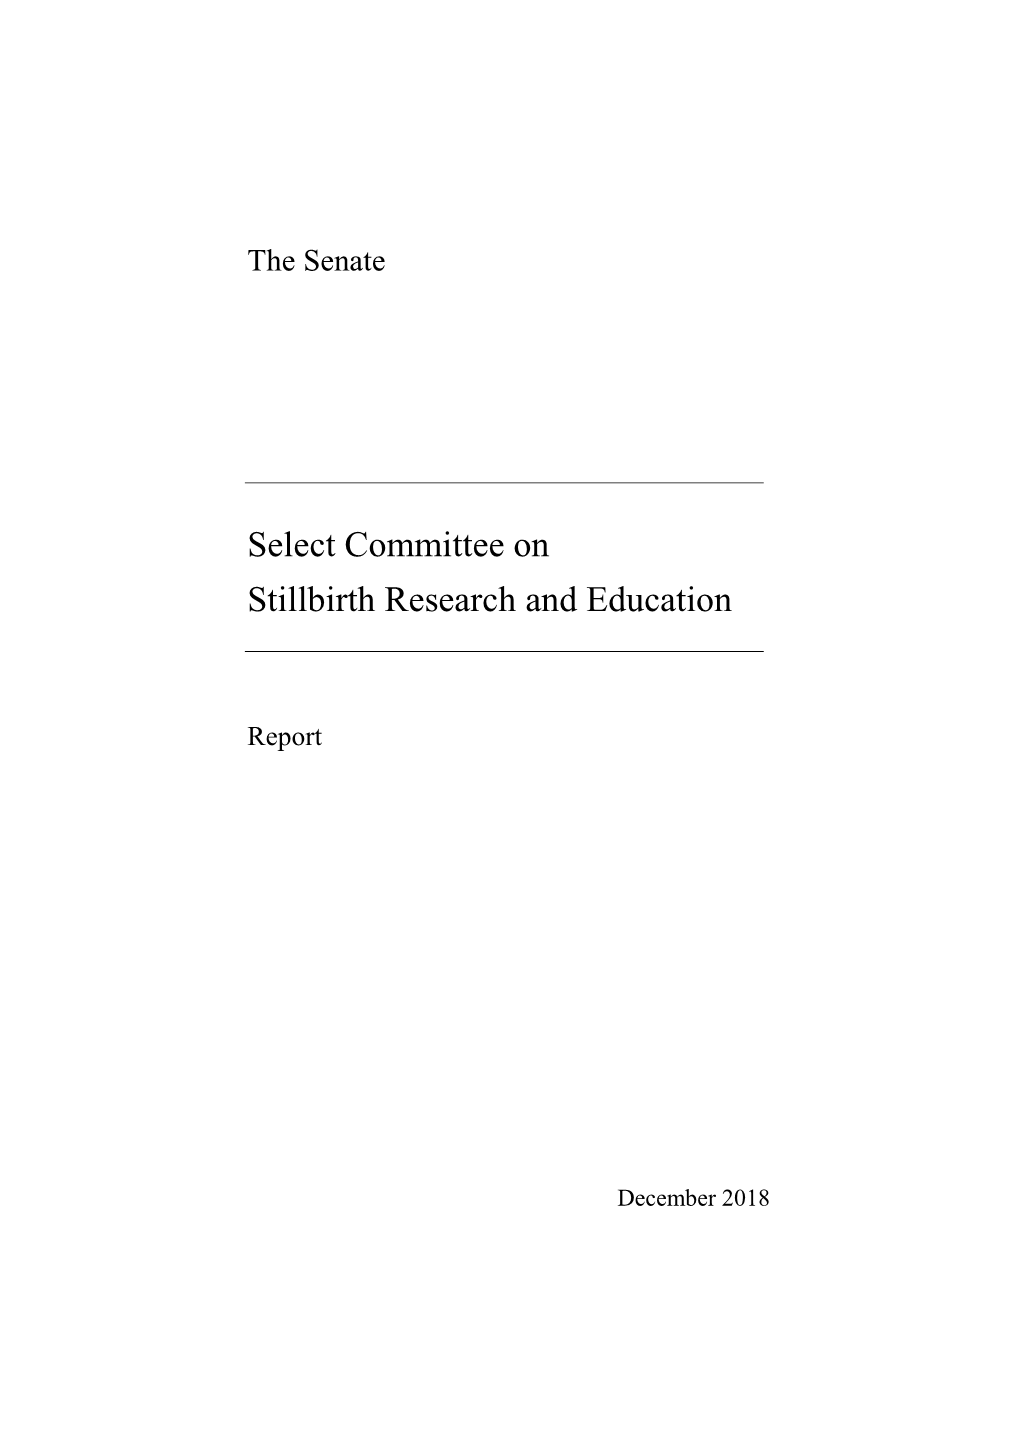 Select Committee on Stillbirth Research and Education